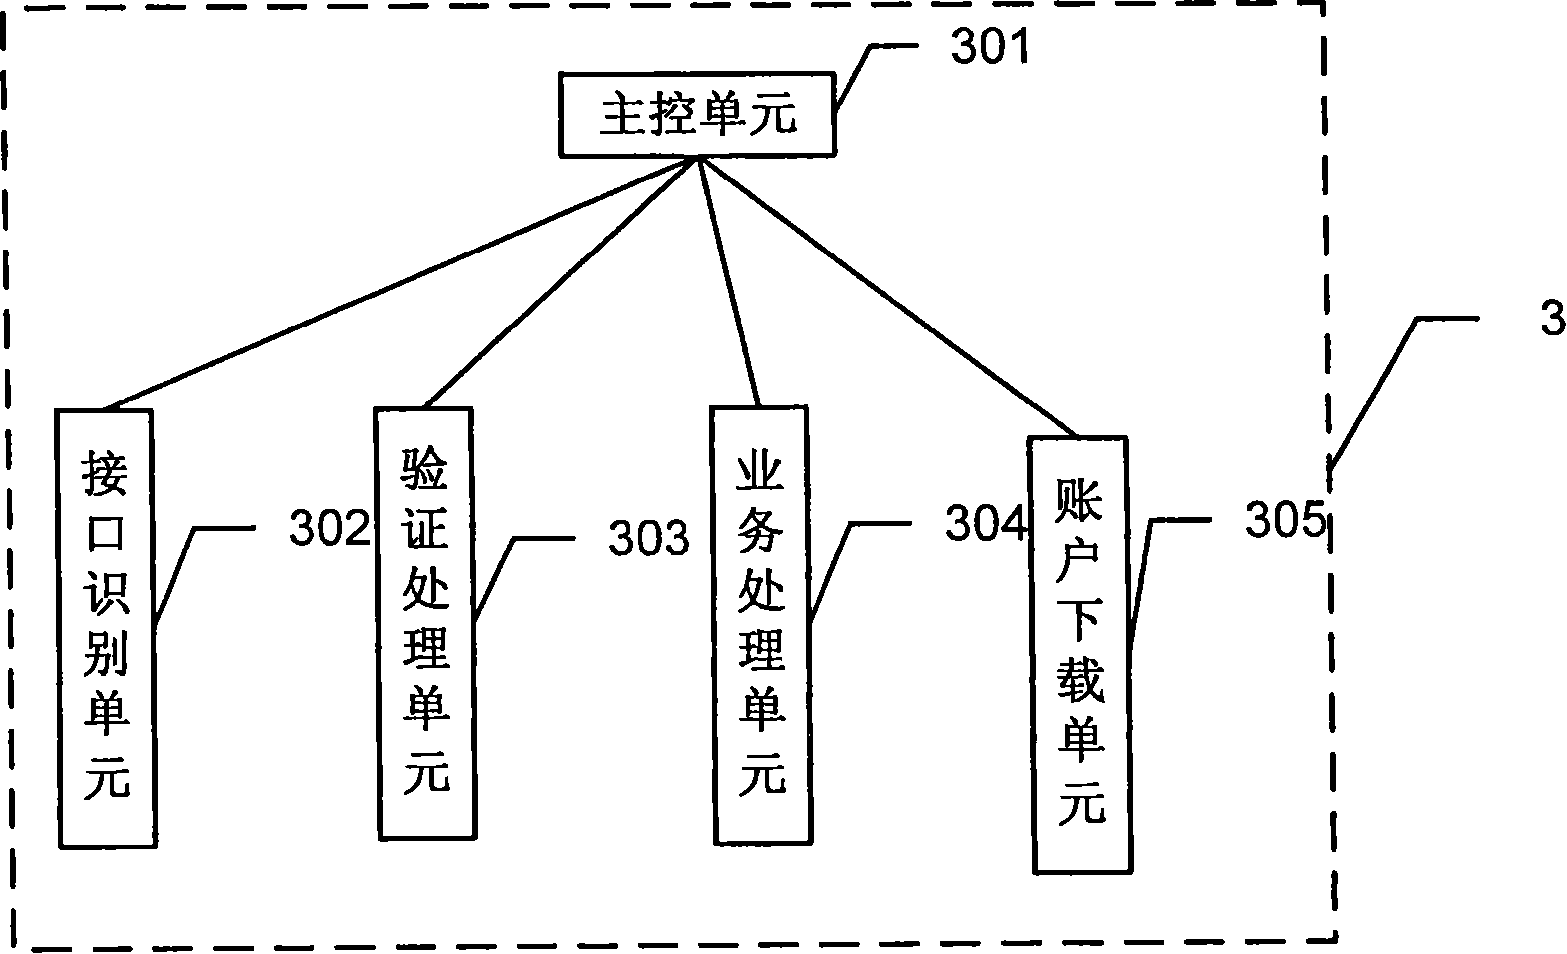 Method and system for enterprise customer to perform financing settlement and management